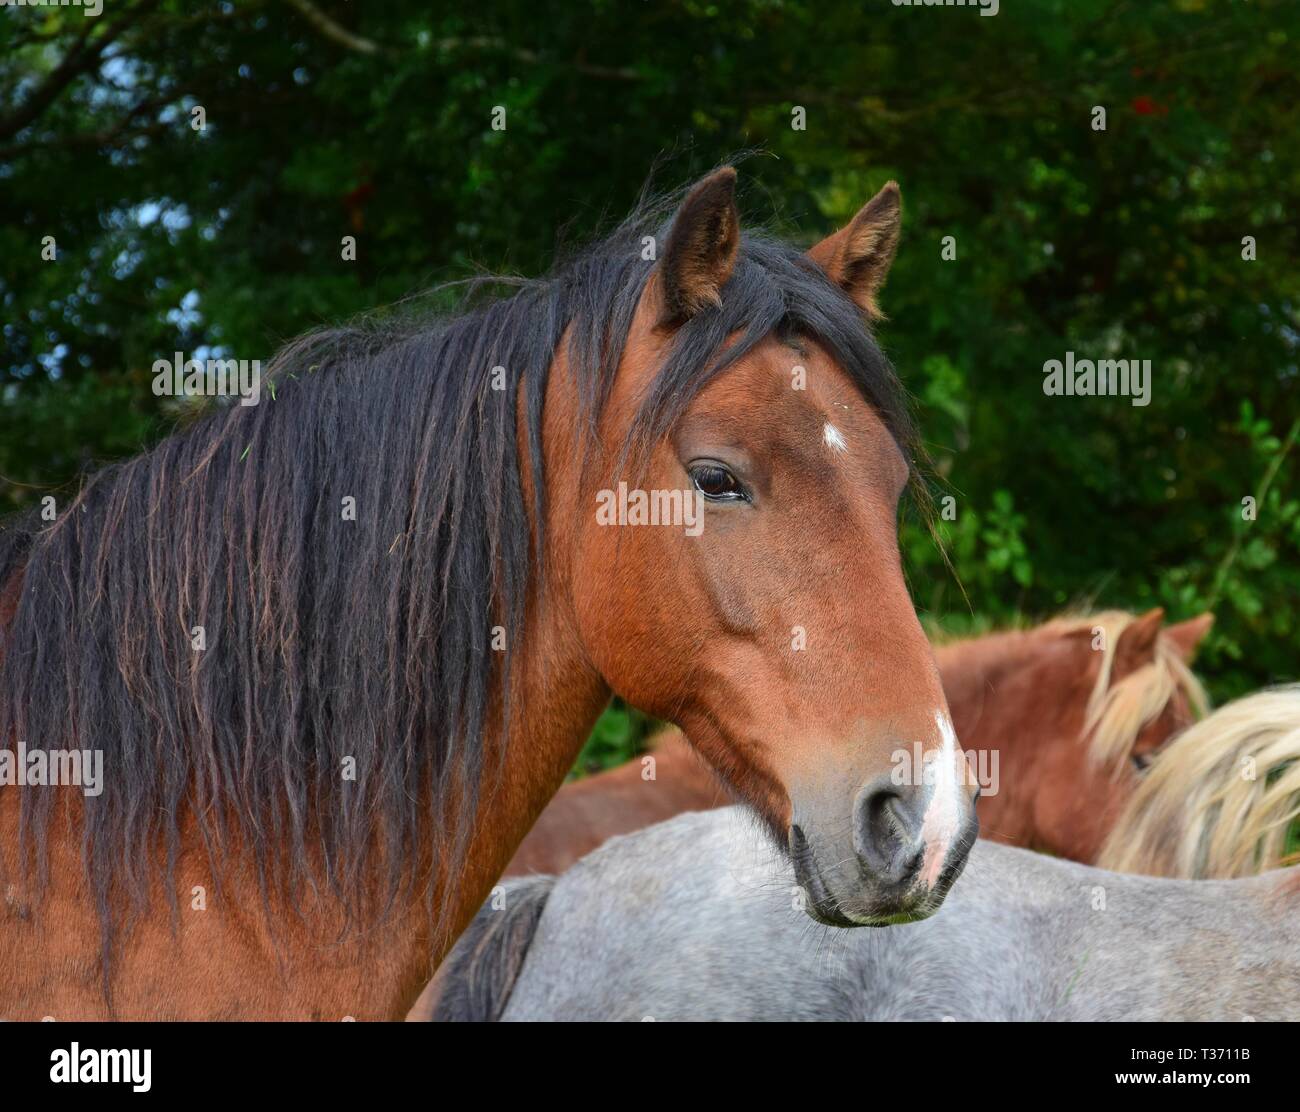 Portrait of a beautiful bay horse in Ireland. Other horses and some trees in the background. Stock Photo